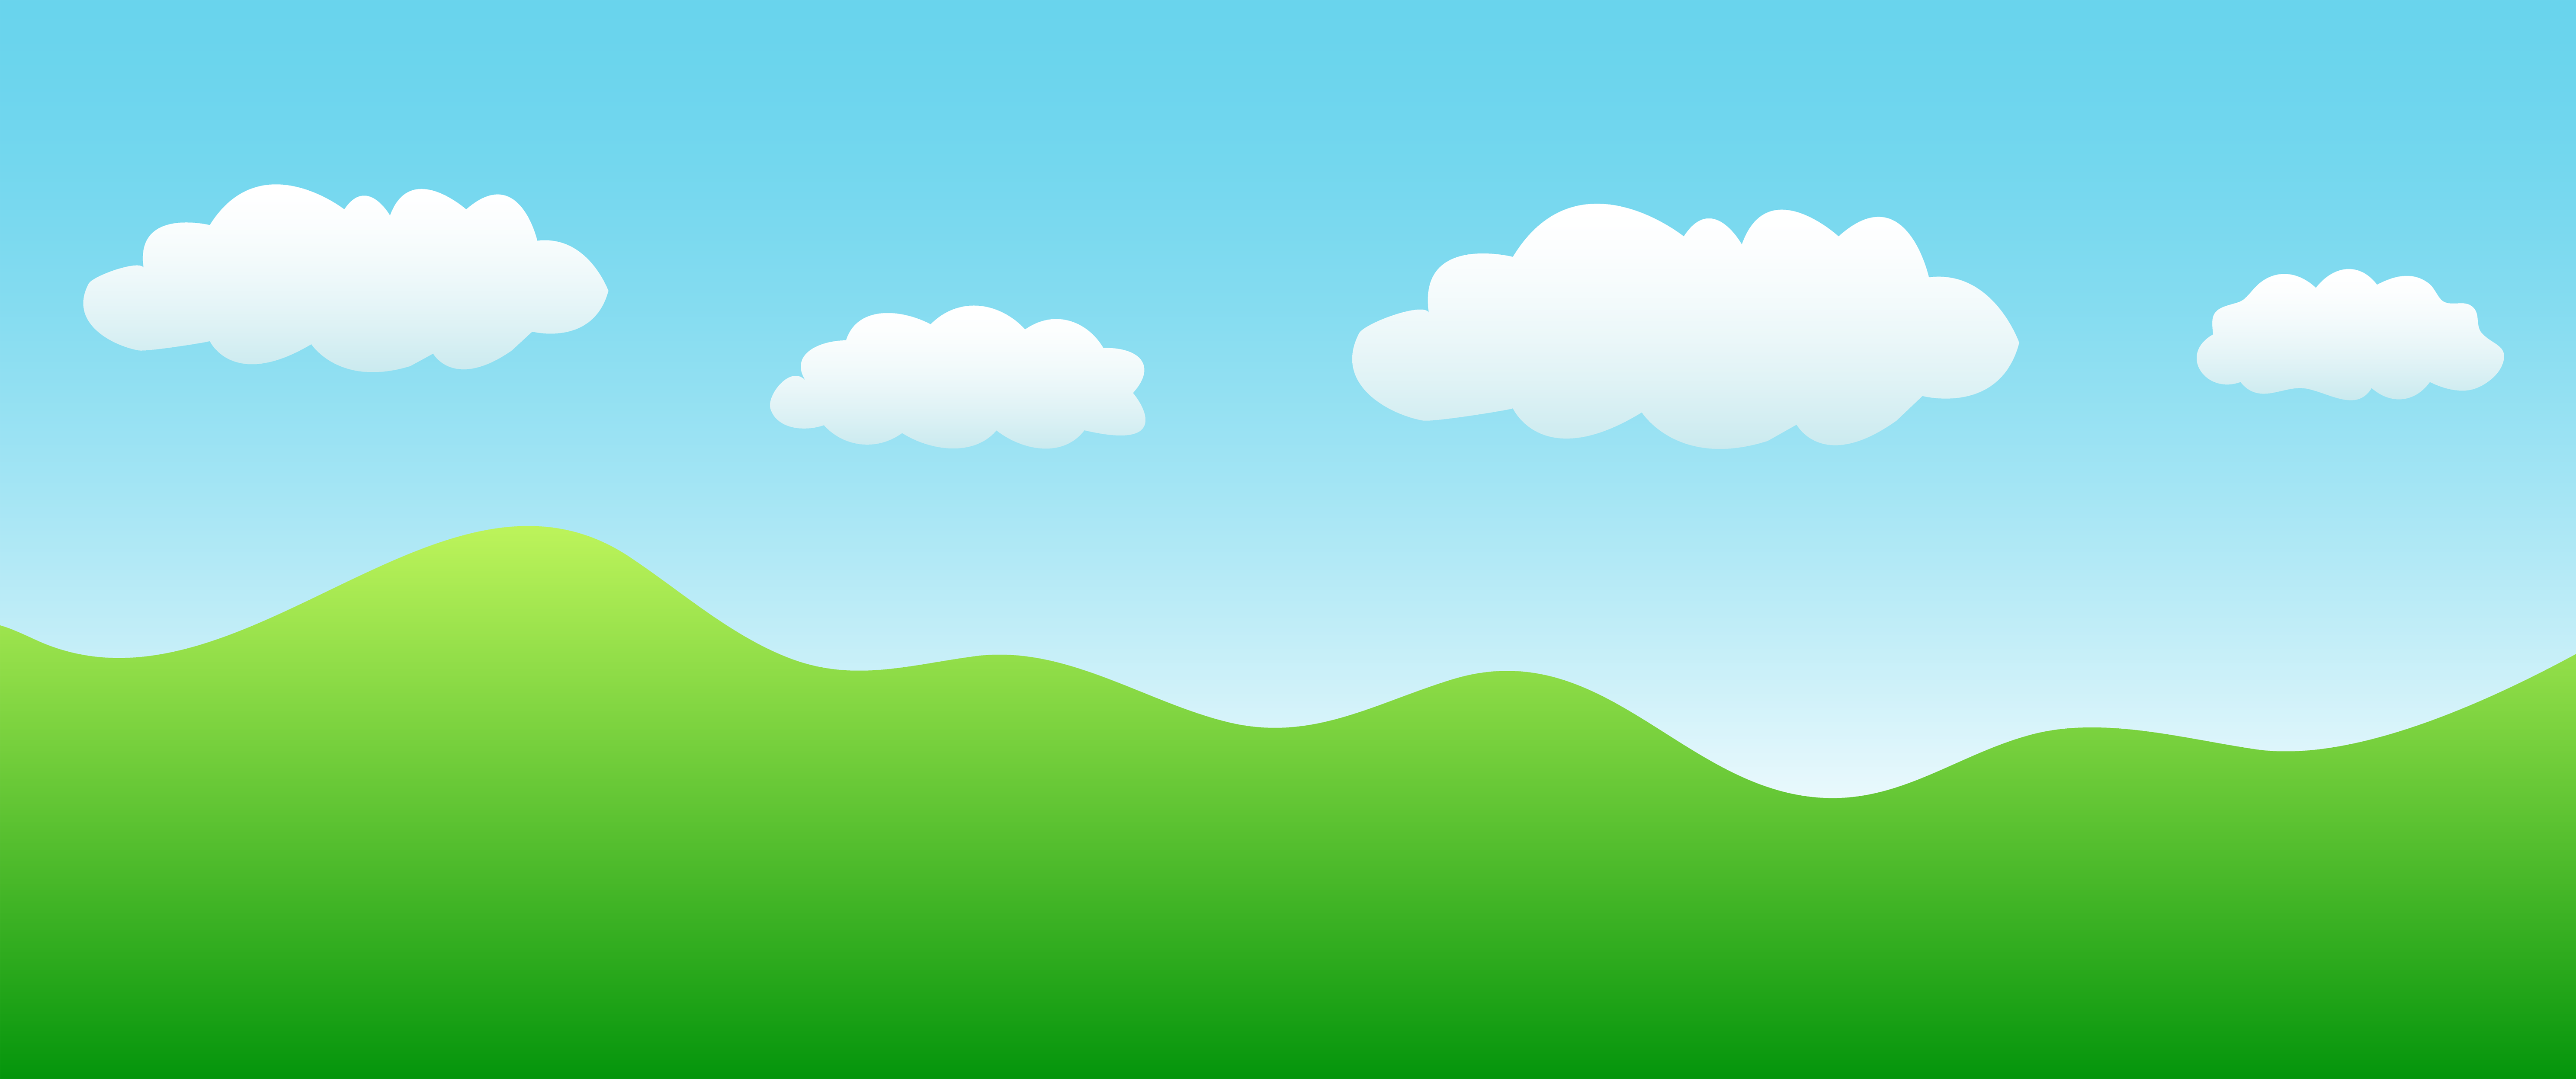 Landscape with hills . Hill clipart beautiful sky